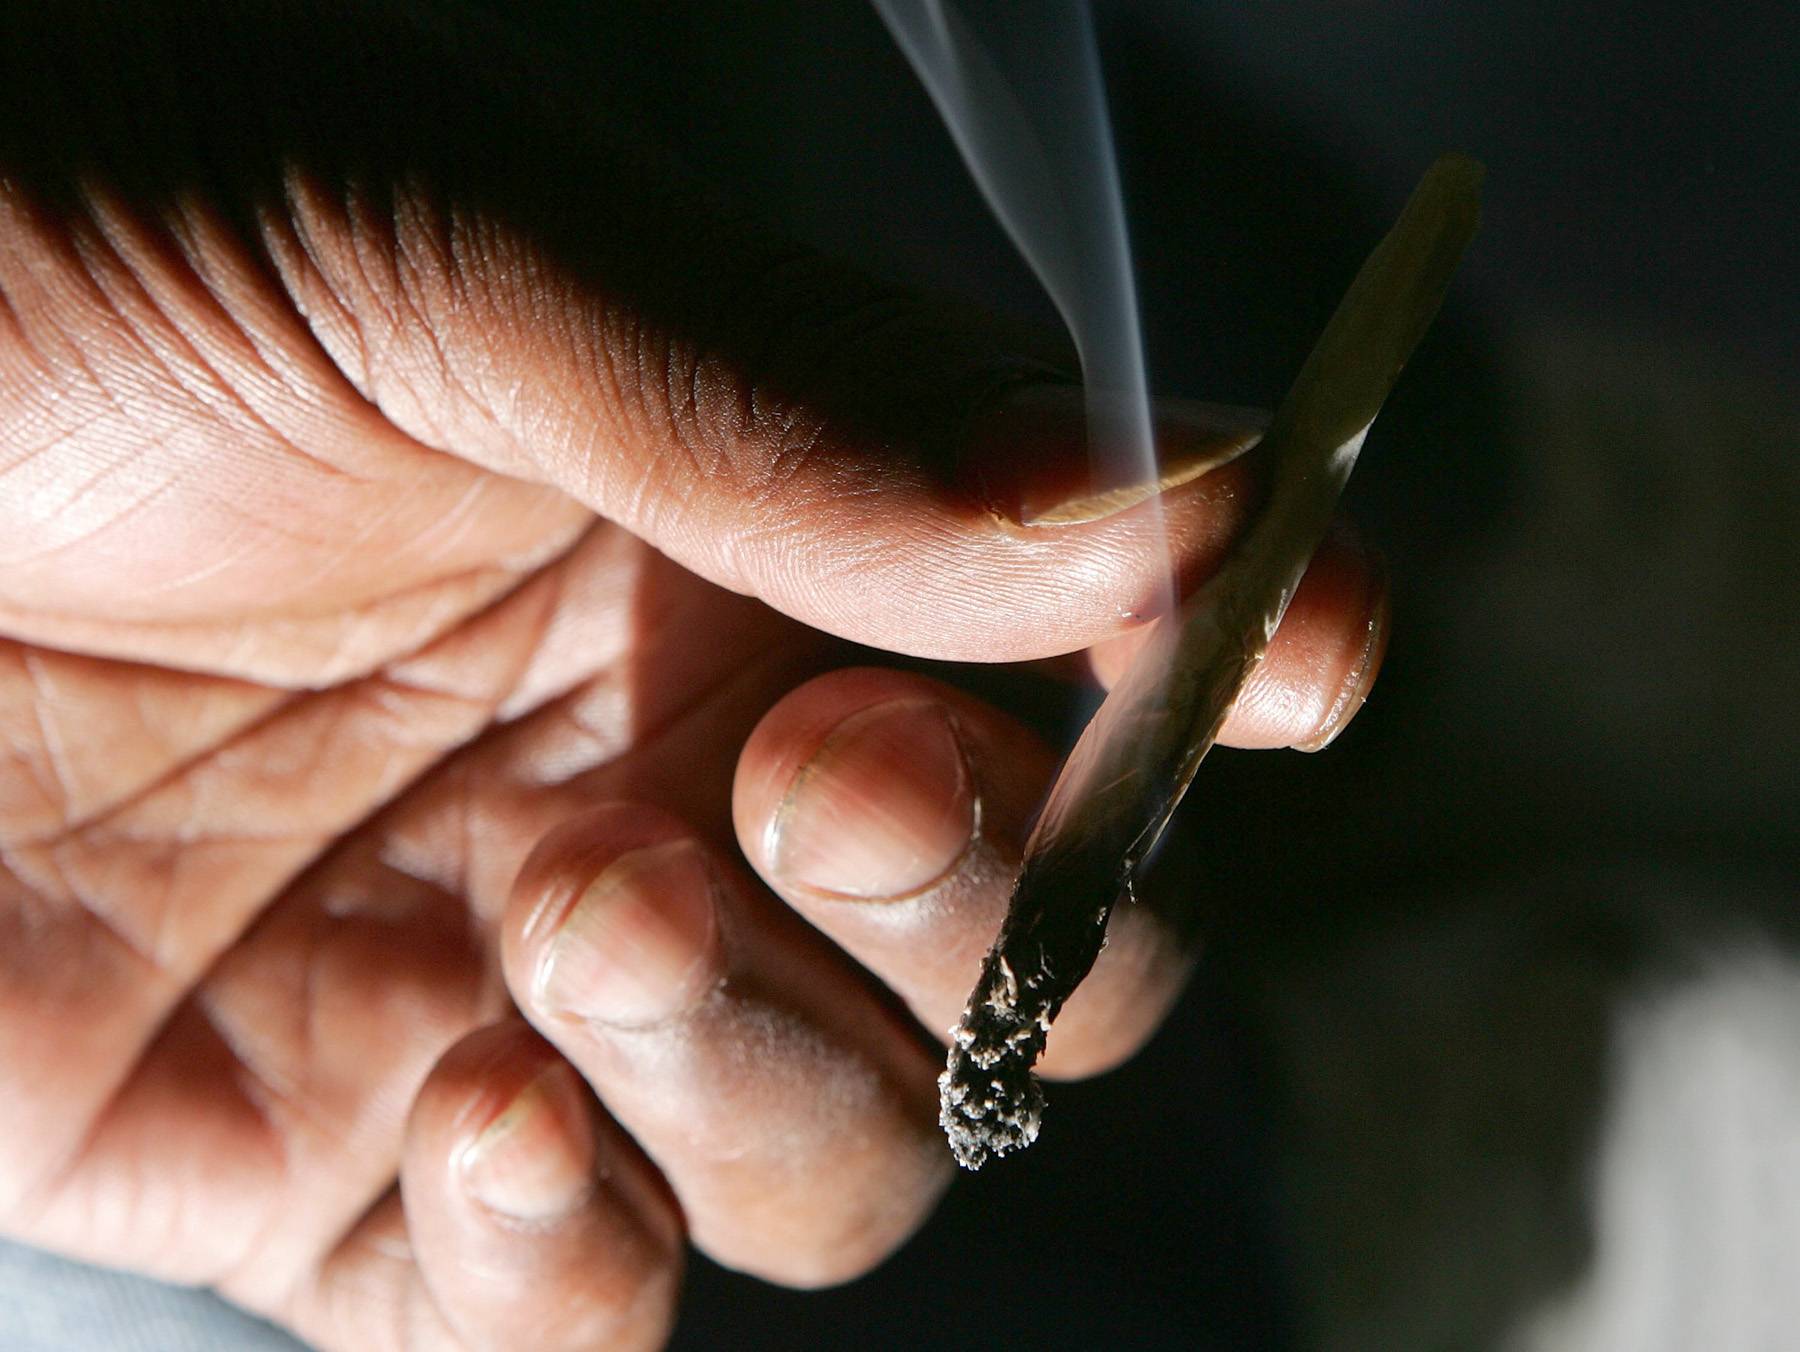 Teen Pot Smokers Are Less Likely to Graduate From High School